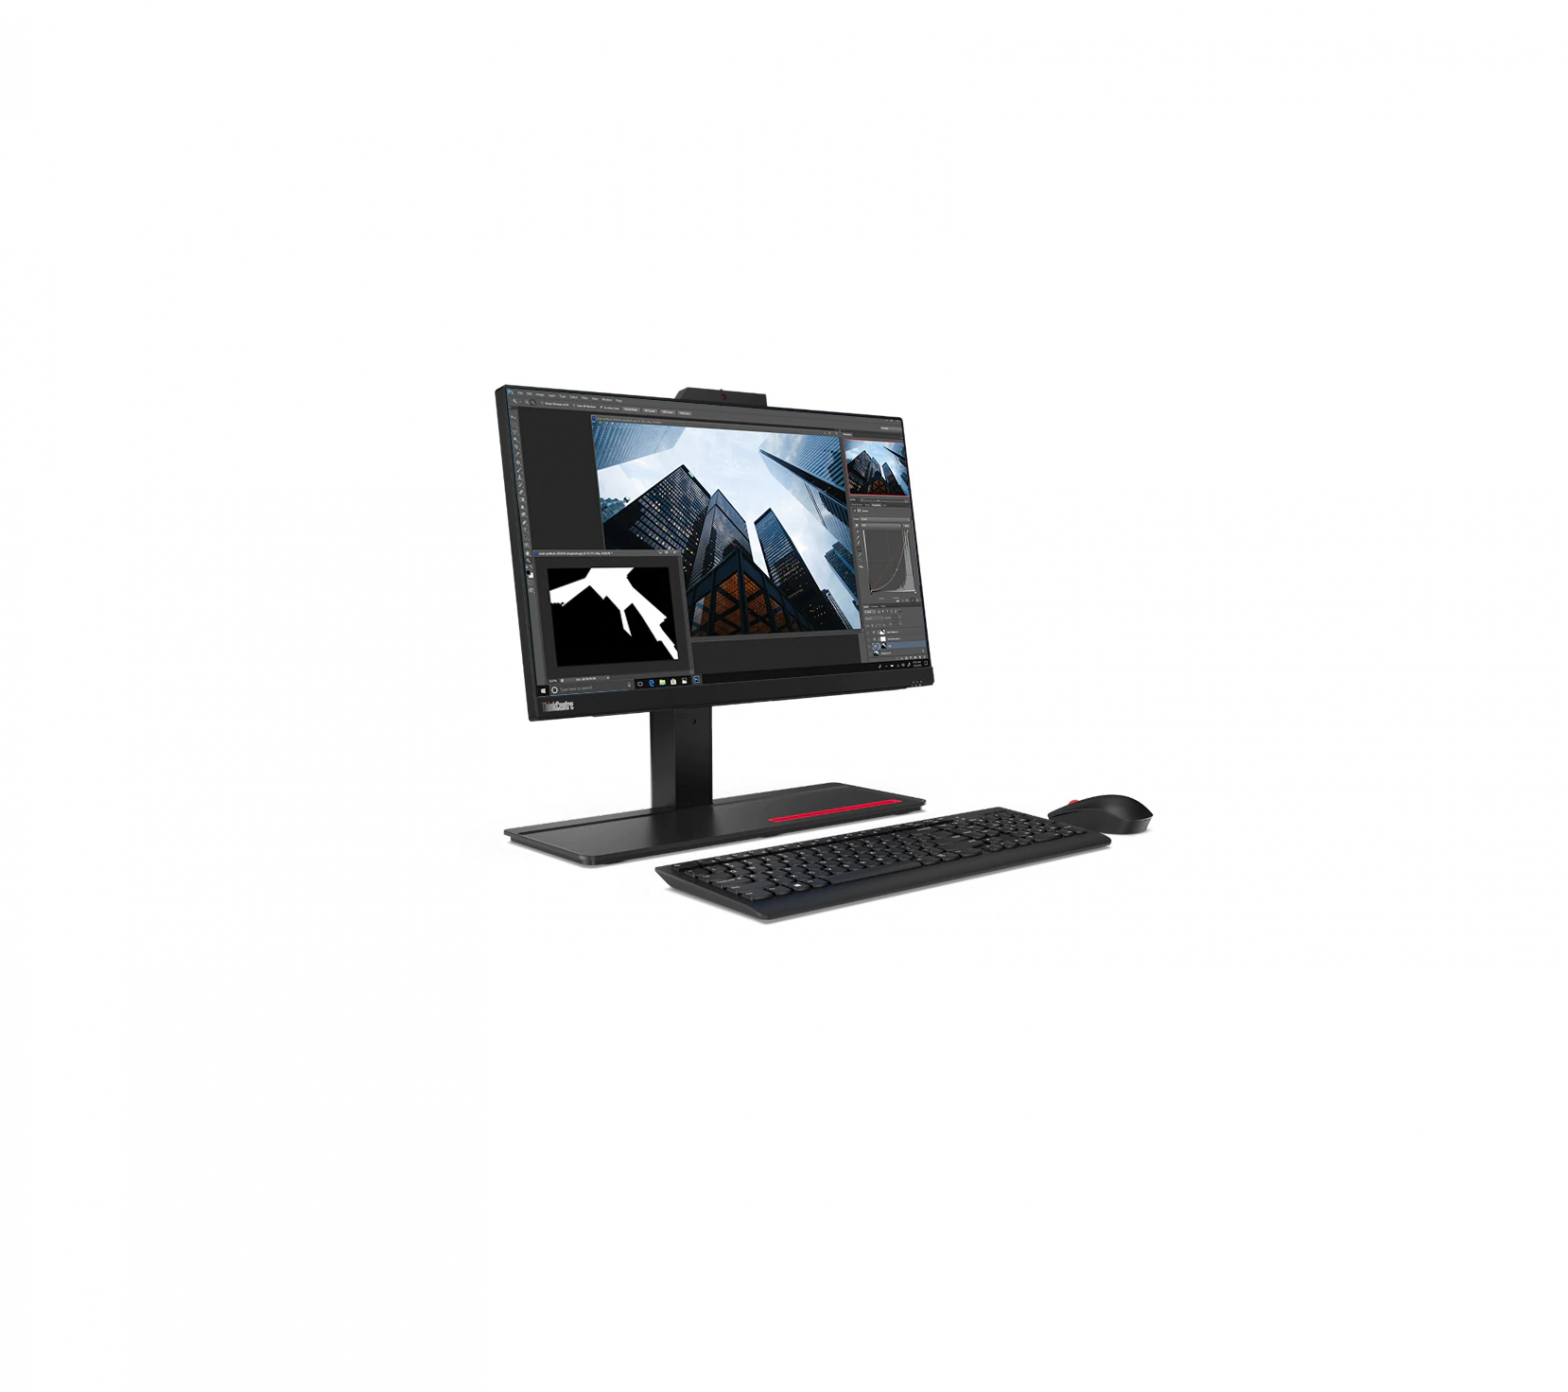 Lenovo ThinkCentre All-in-One PC User Guide